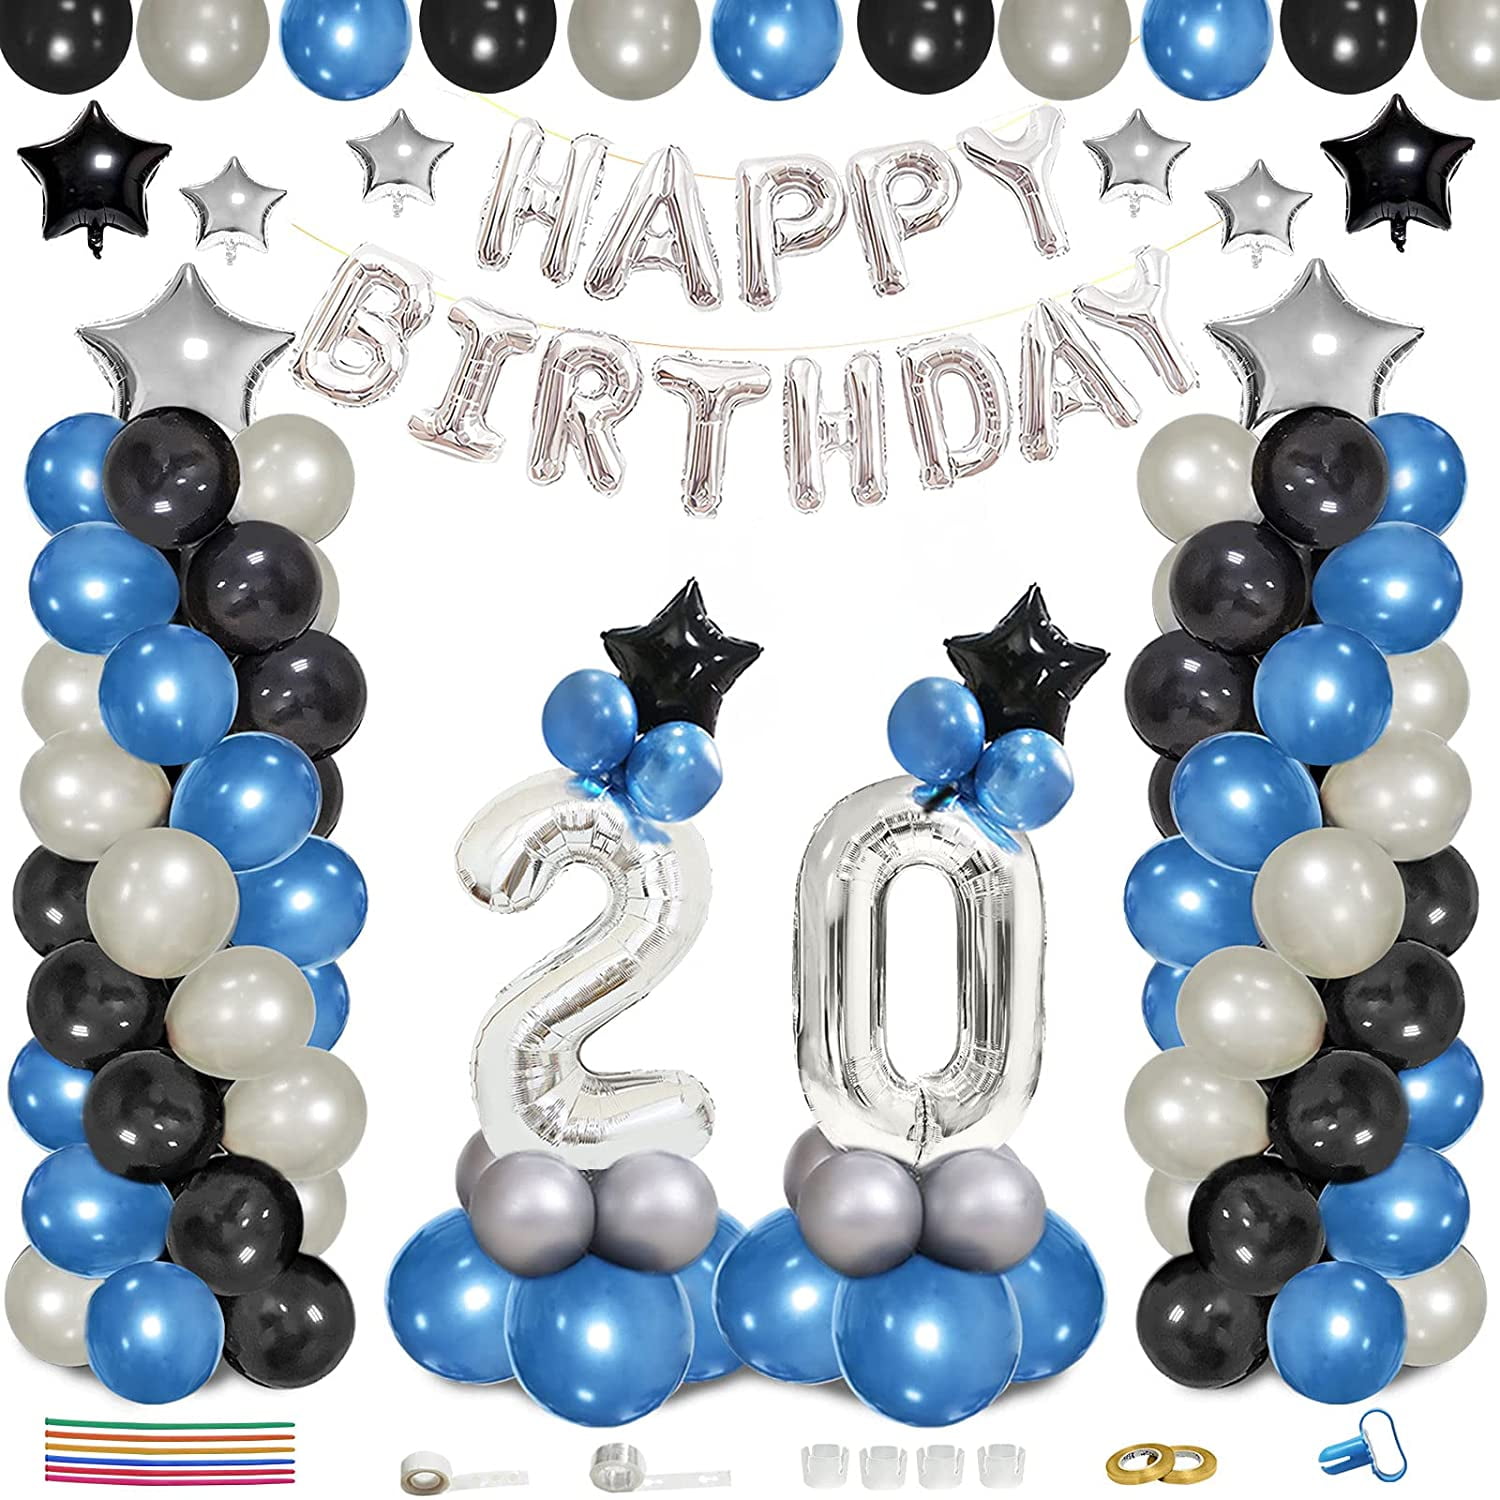 Party Photo Props Blue 57 Photo Birthday Cake Topper Glitter Women Men Happy 57th Birthday Decoration With Photo Frame 